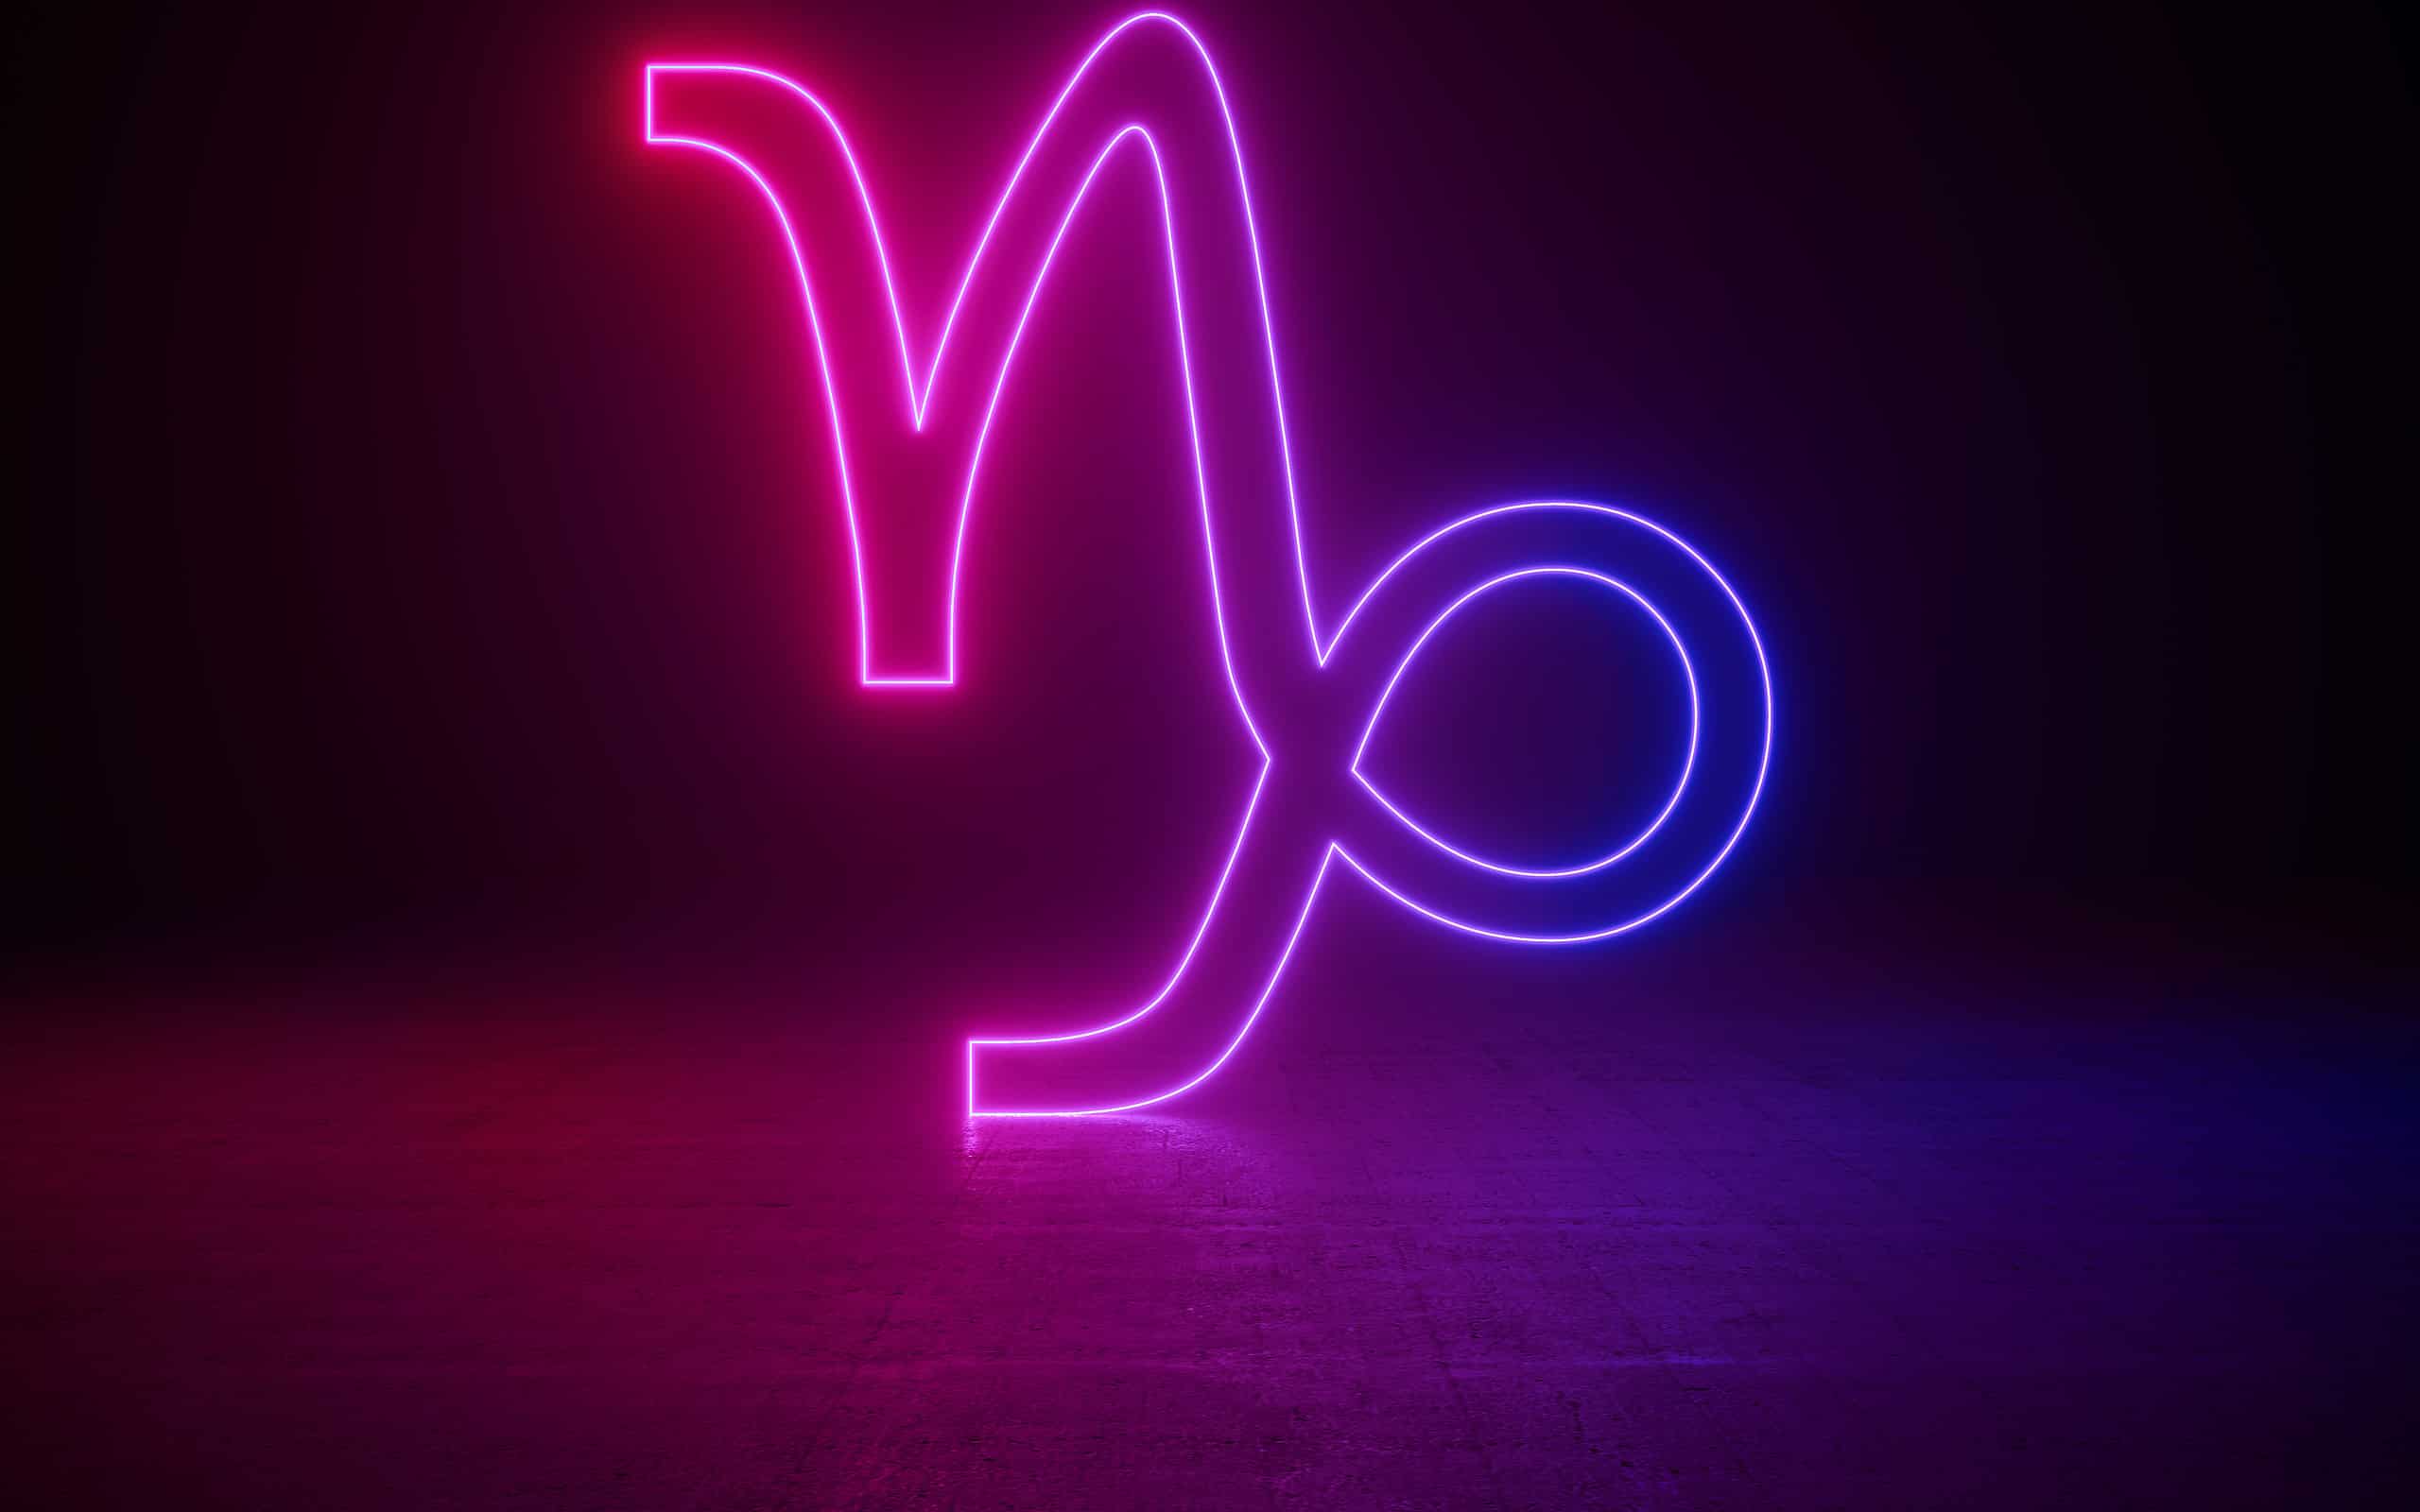 Astrological zodiac signs, astrology and horoscopes concept 3d render, glowing lines, neon lights, background,